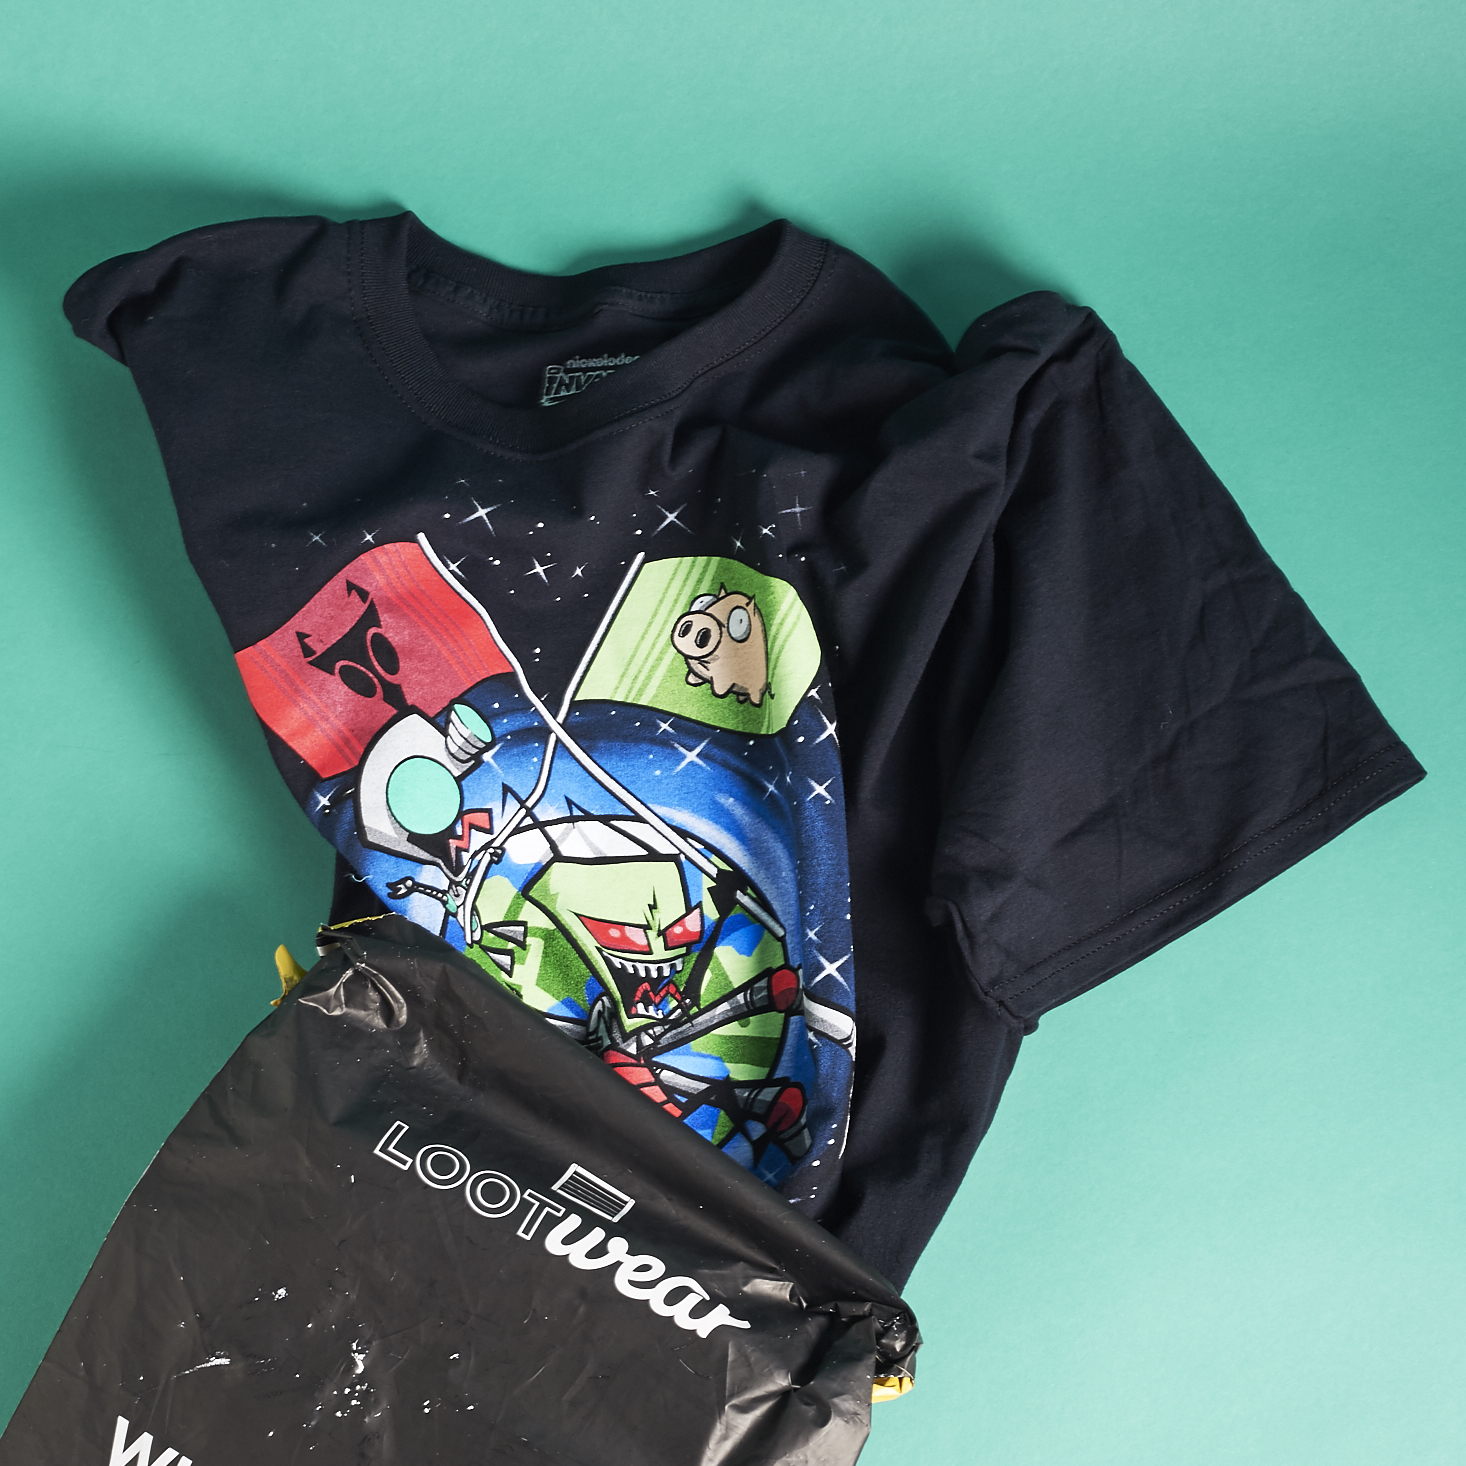 Loot Tees Subscription by Loot Crate Review + Coupon – December 2016